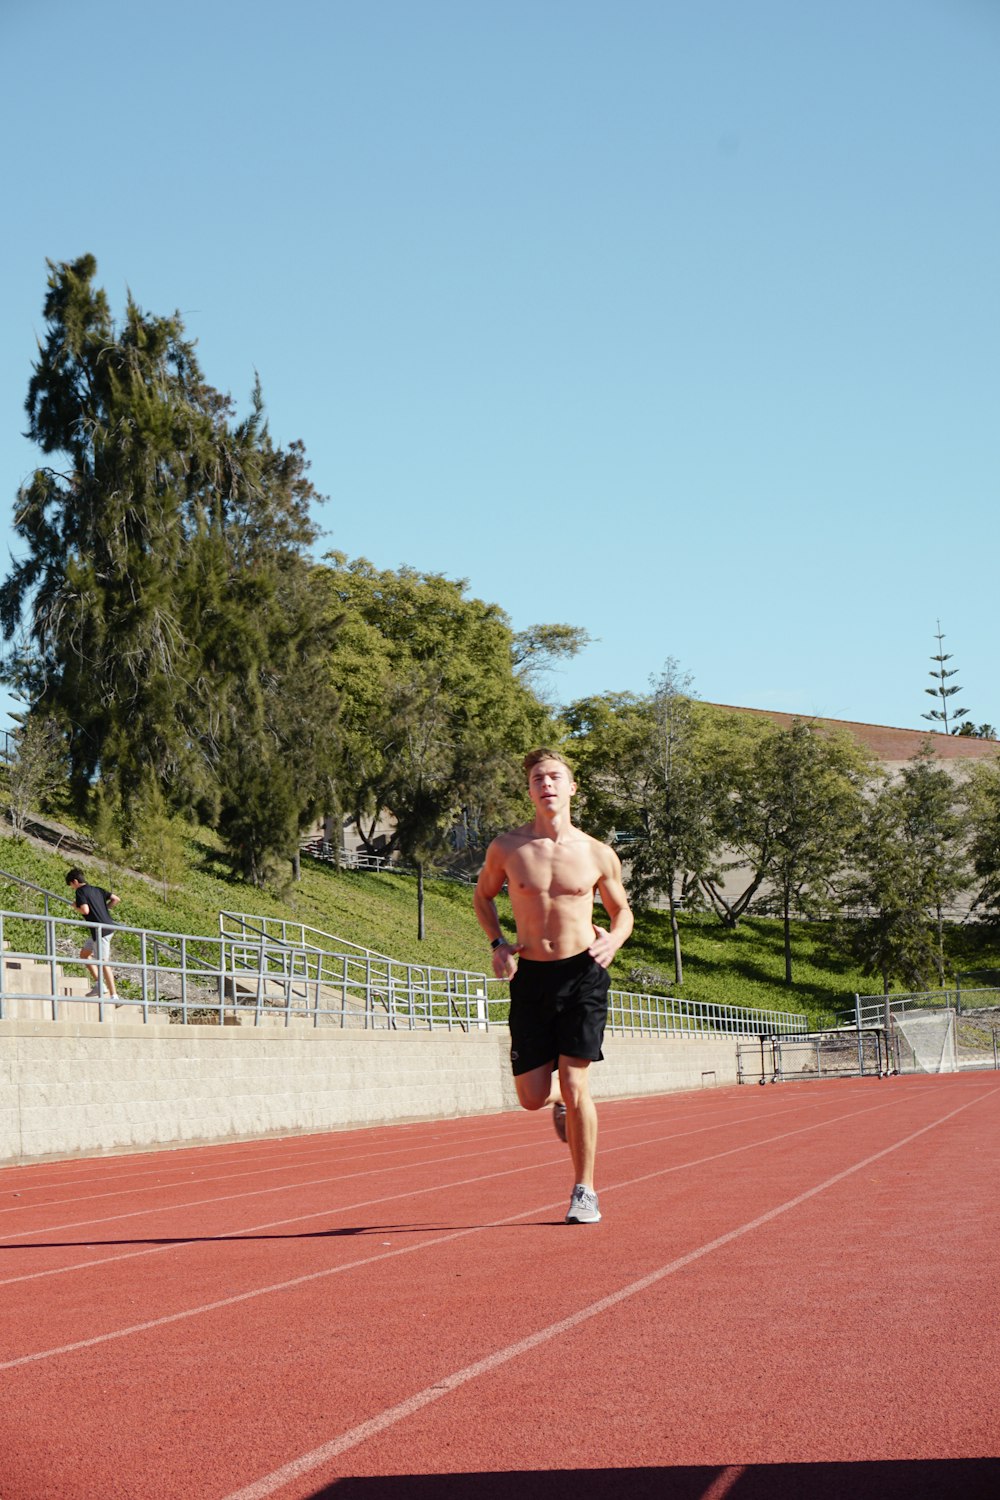 topless man in black shorts running on track field during daytime